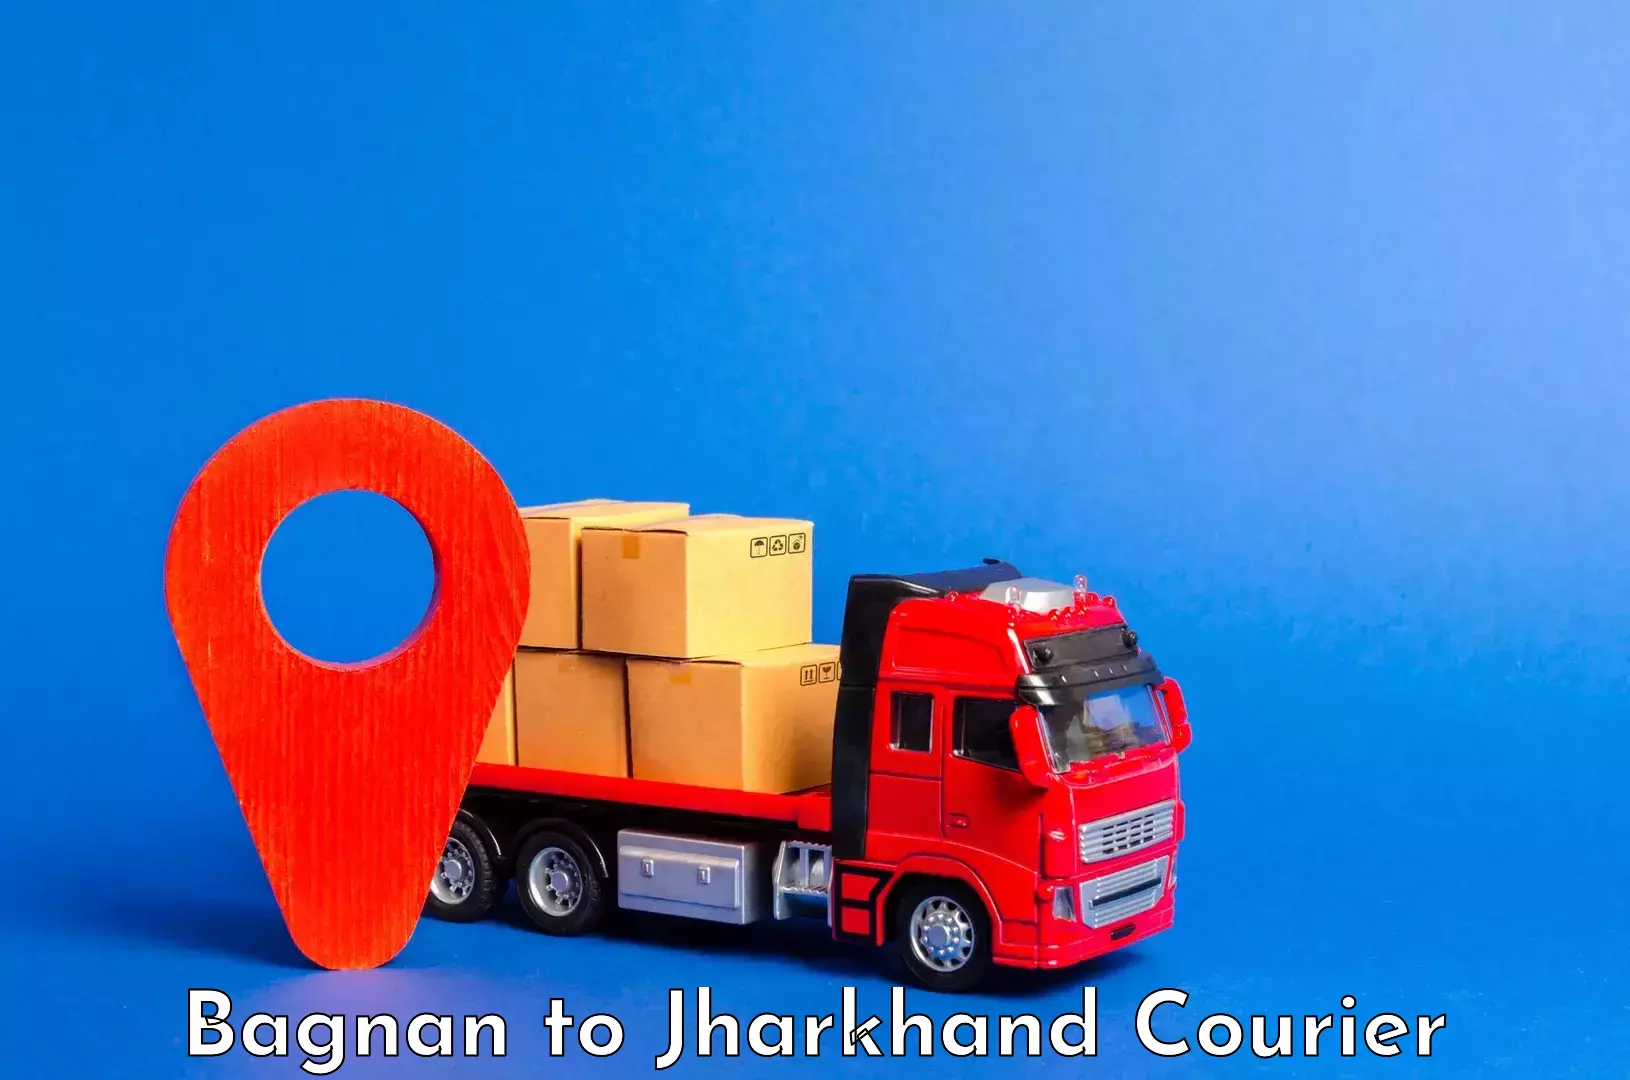 Baggage delivery scheduling Bagnan to Jharkhand